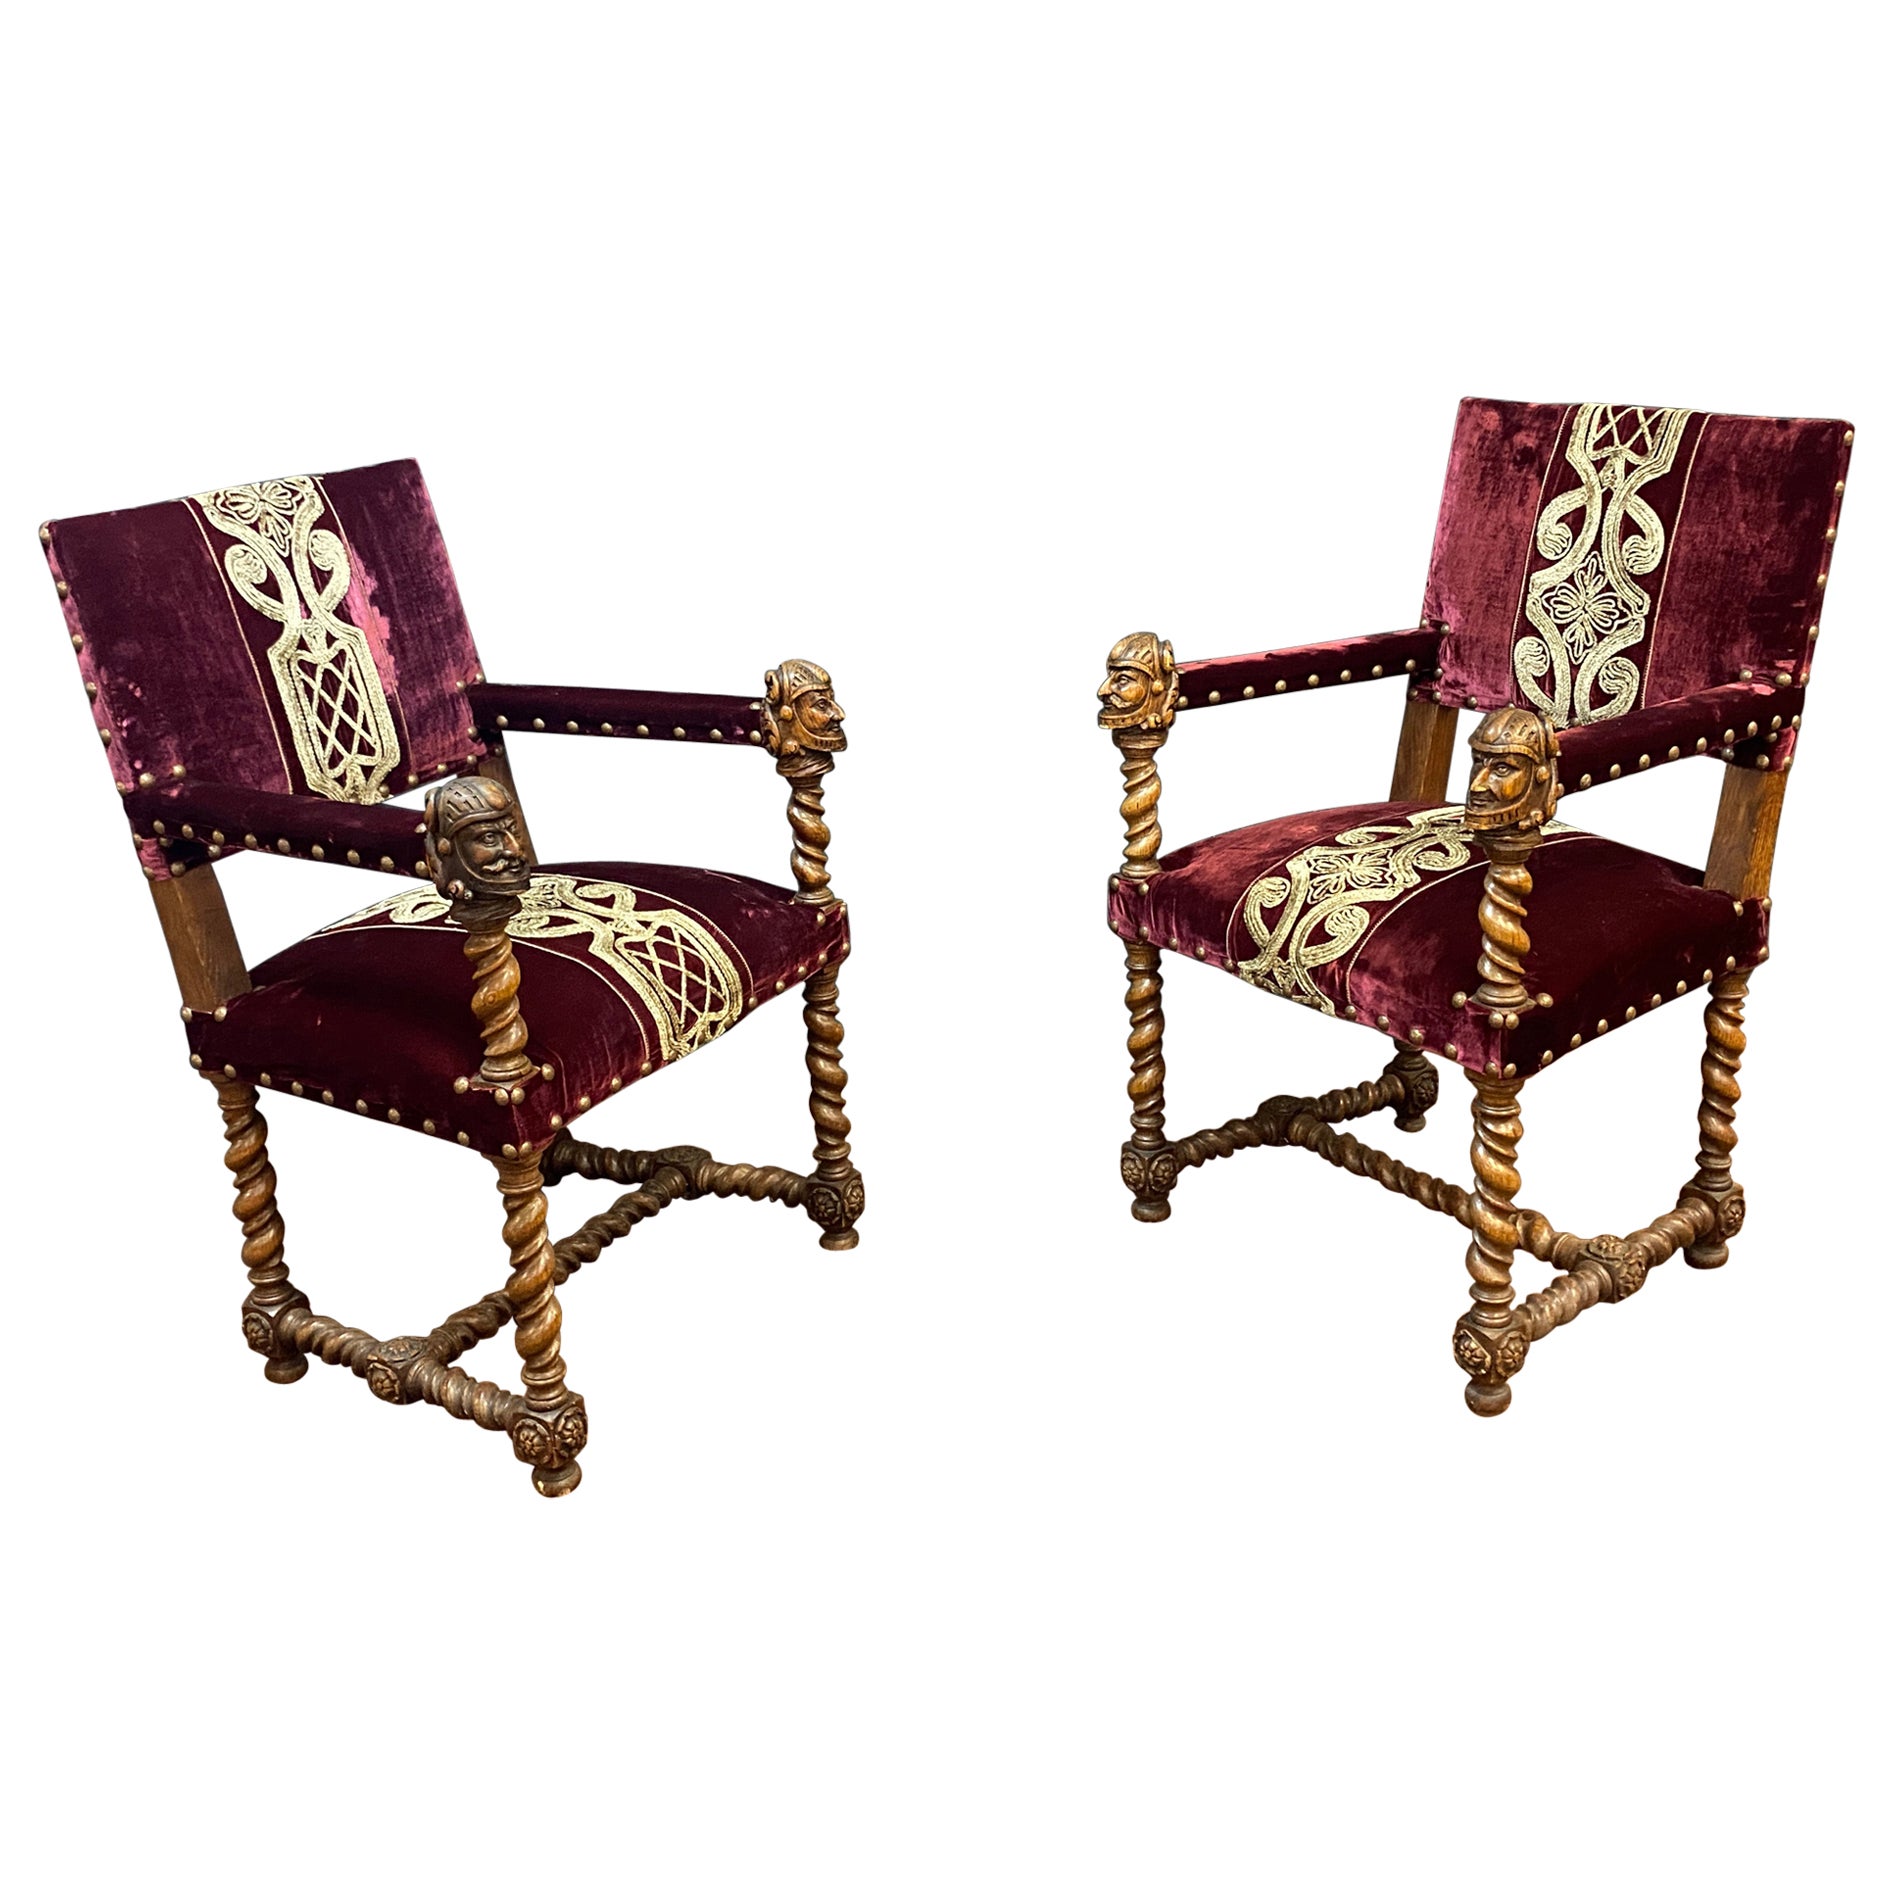 Pair of original Louis XIII style armchairs in oak circa 1930, new fabric